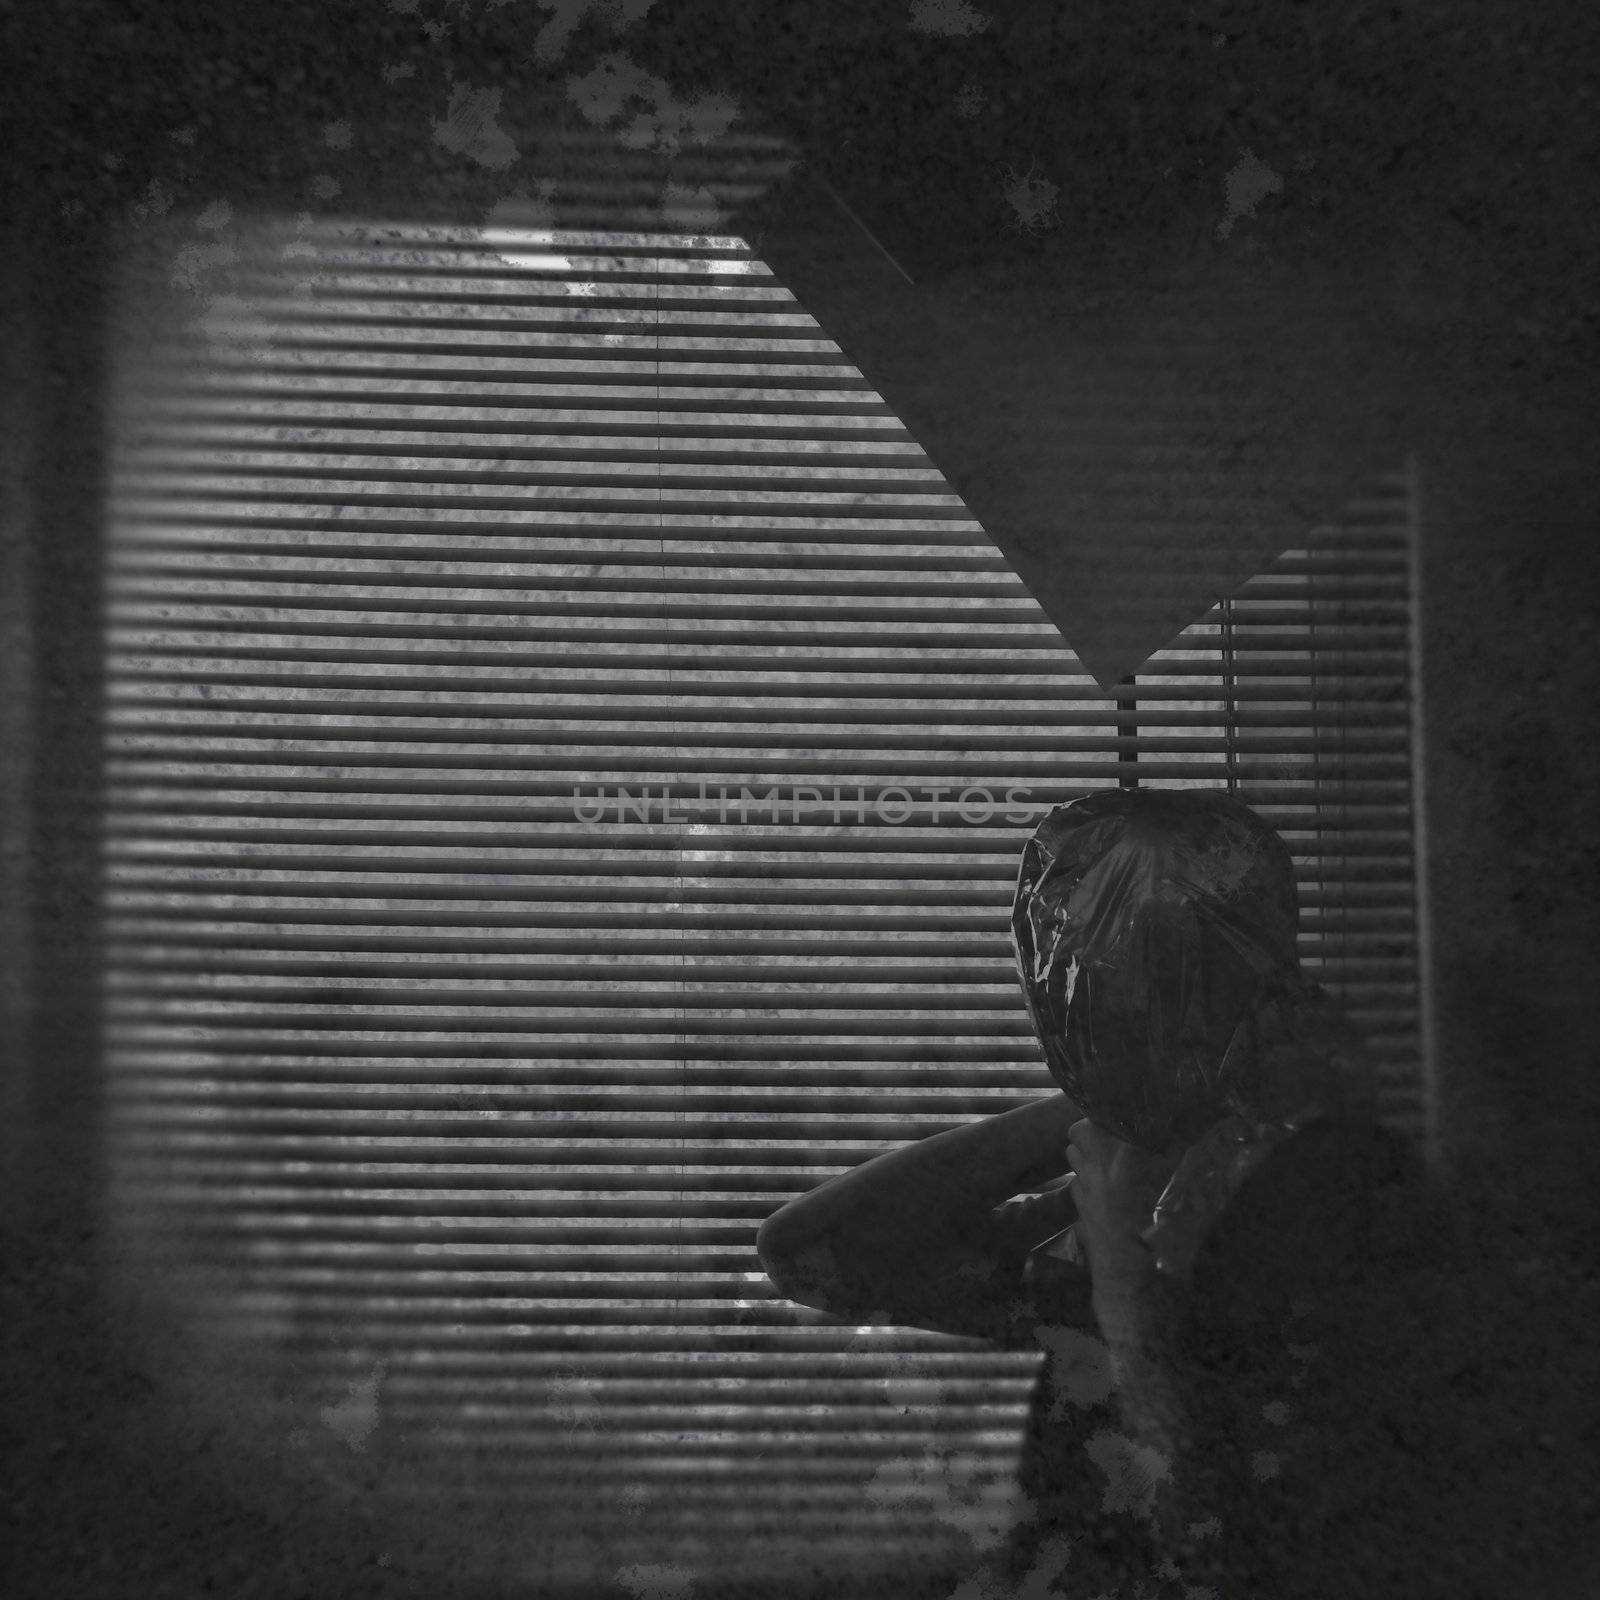 Psychic draped with ectoplasm against window blinds in dark decayed interior. Black and white.